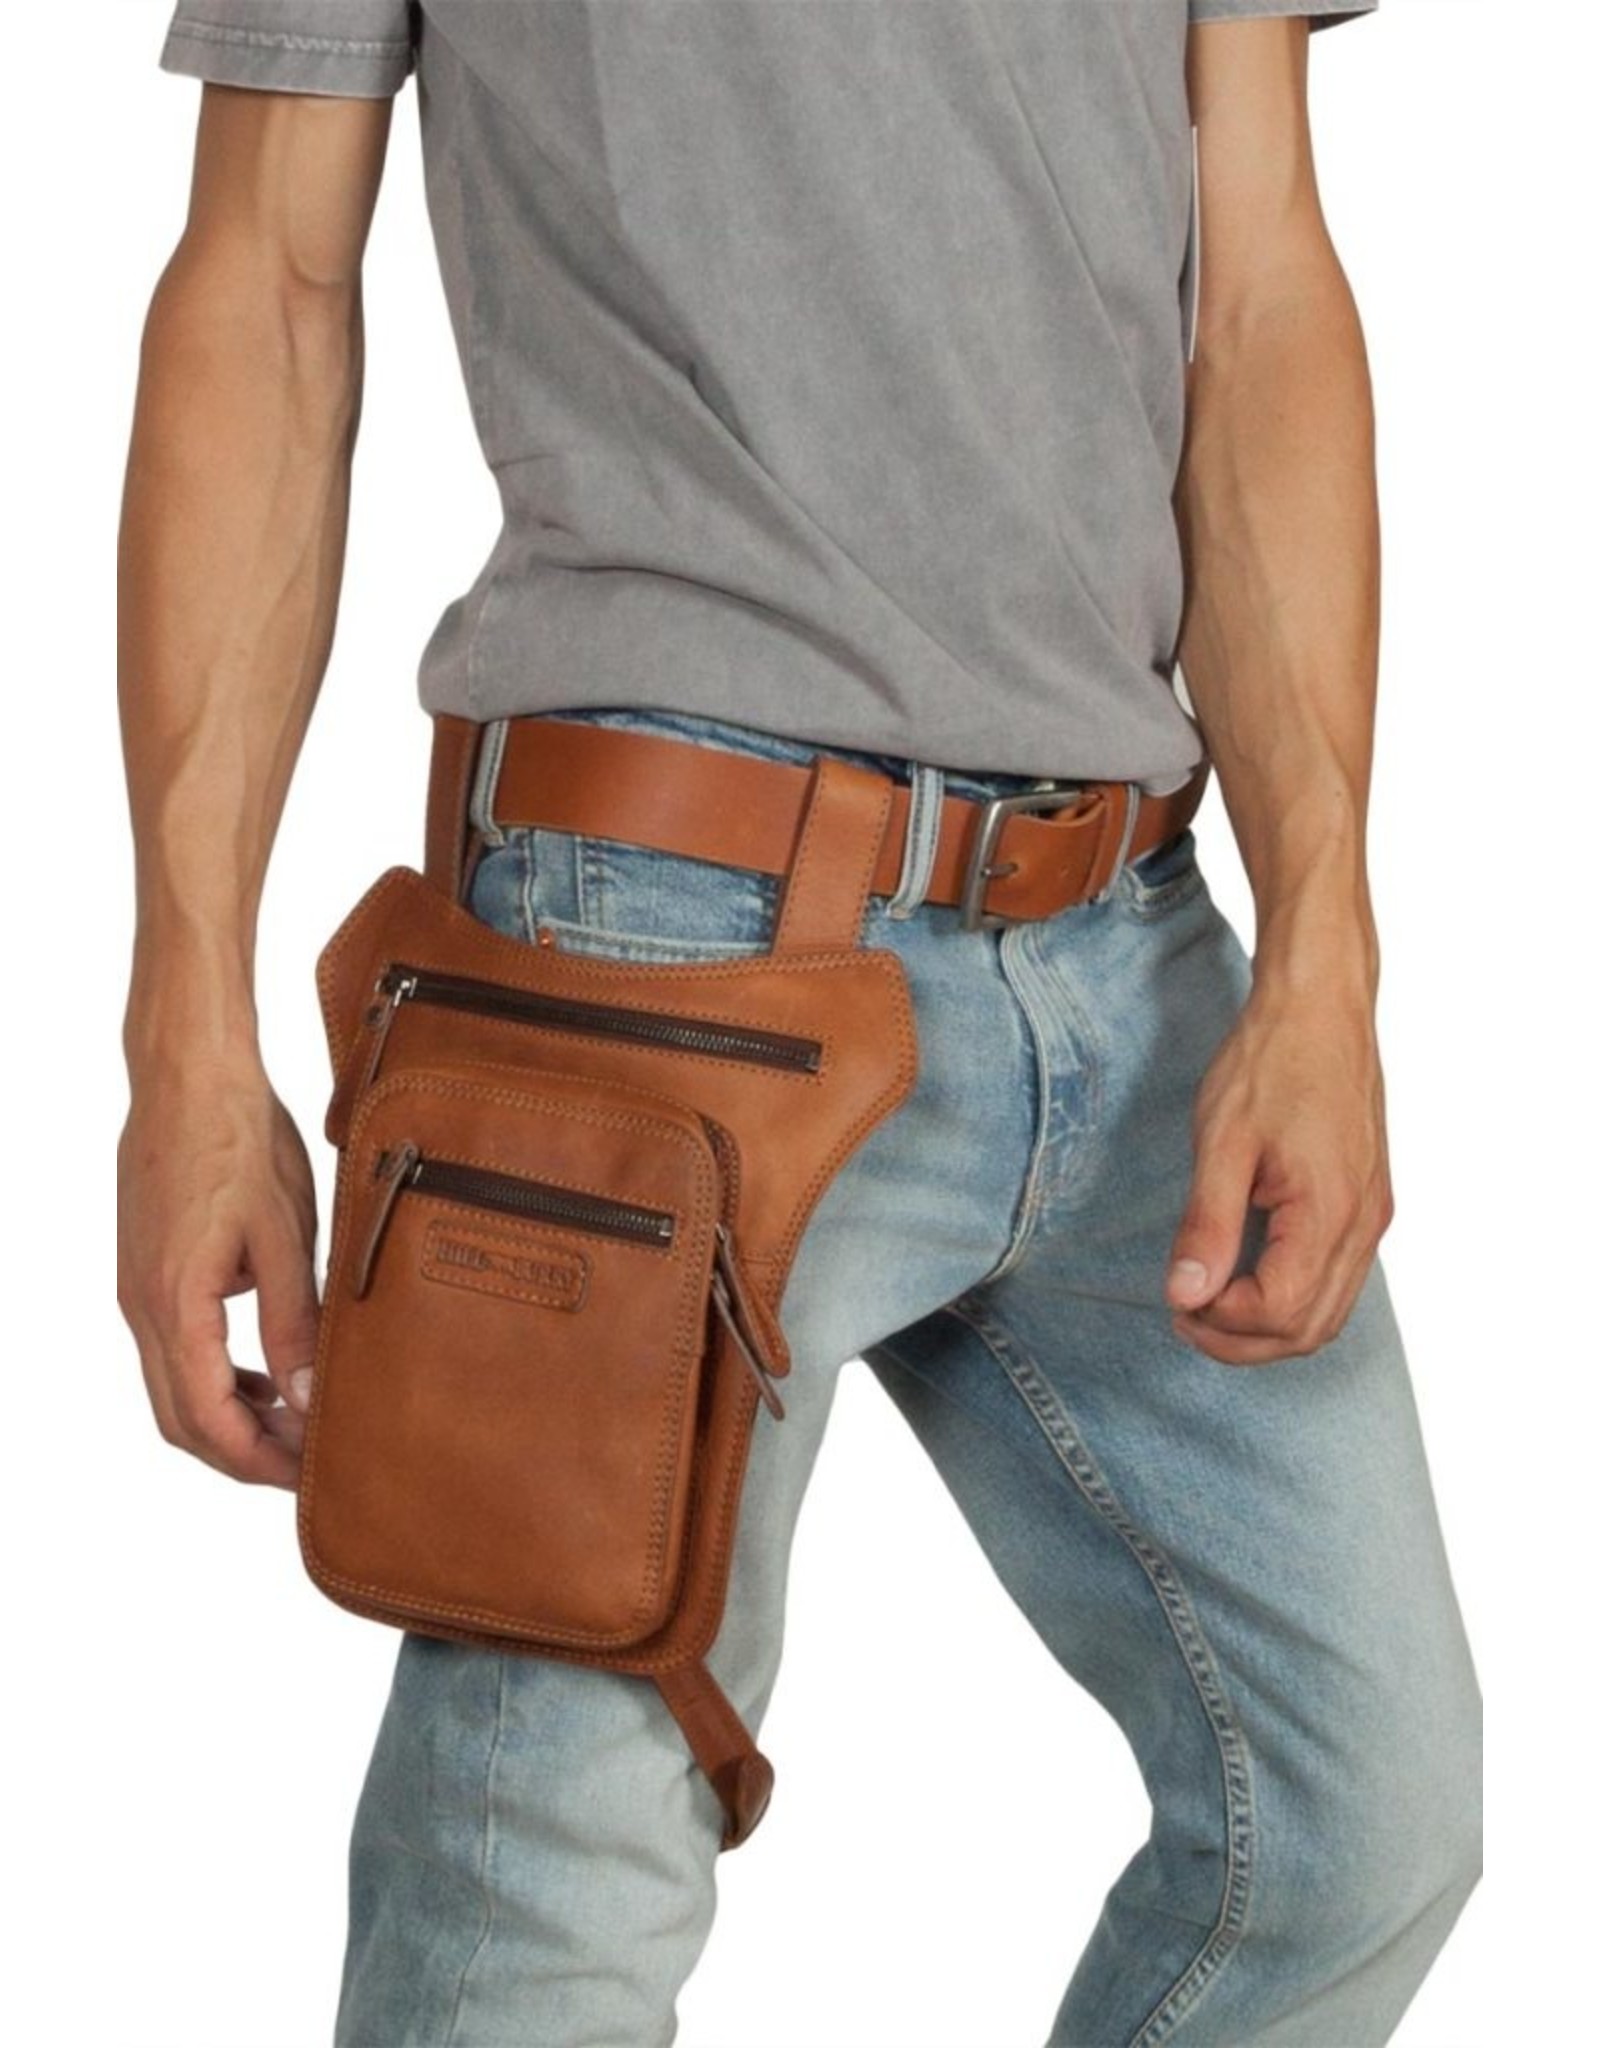 HillBurry Leather Festival bags, waist bags and belt bags - Hillburry leather belt bag - leg bag cognac